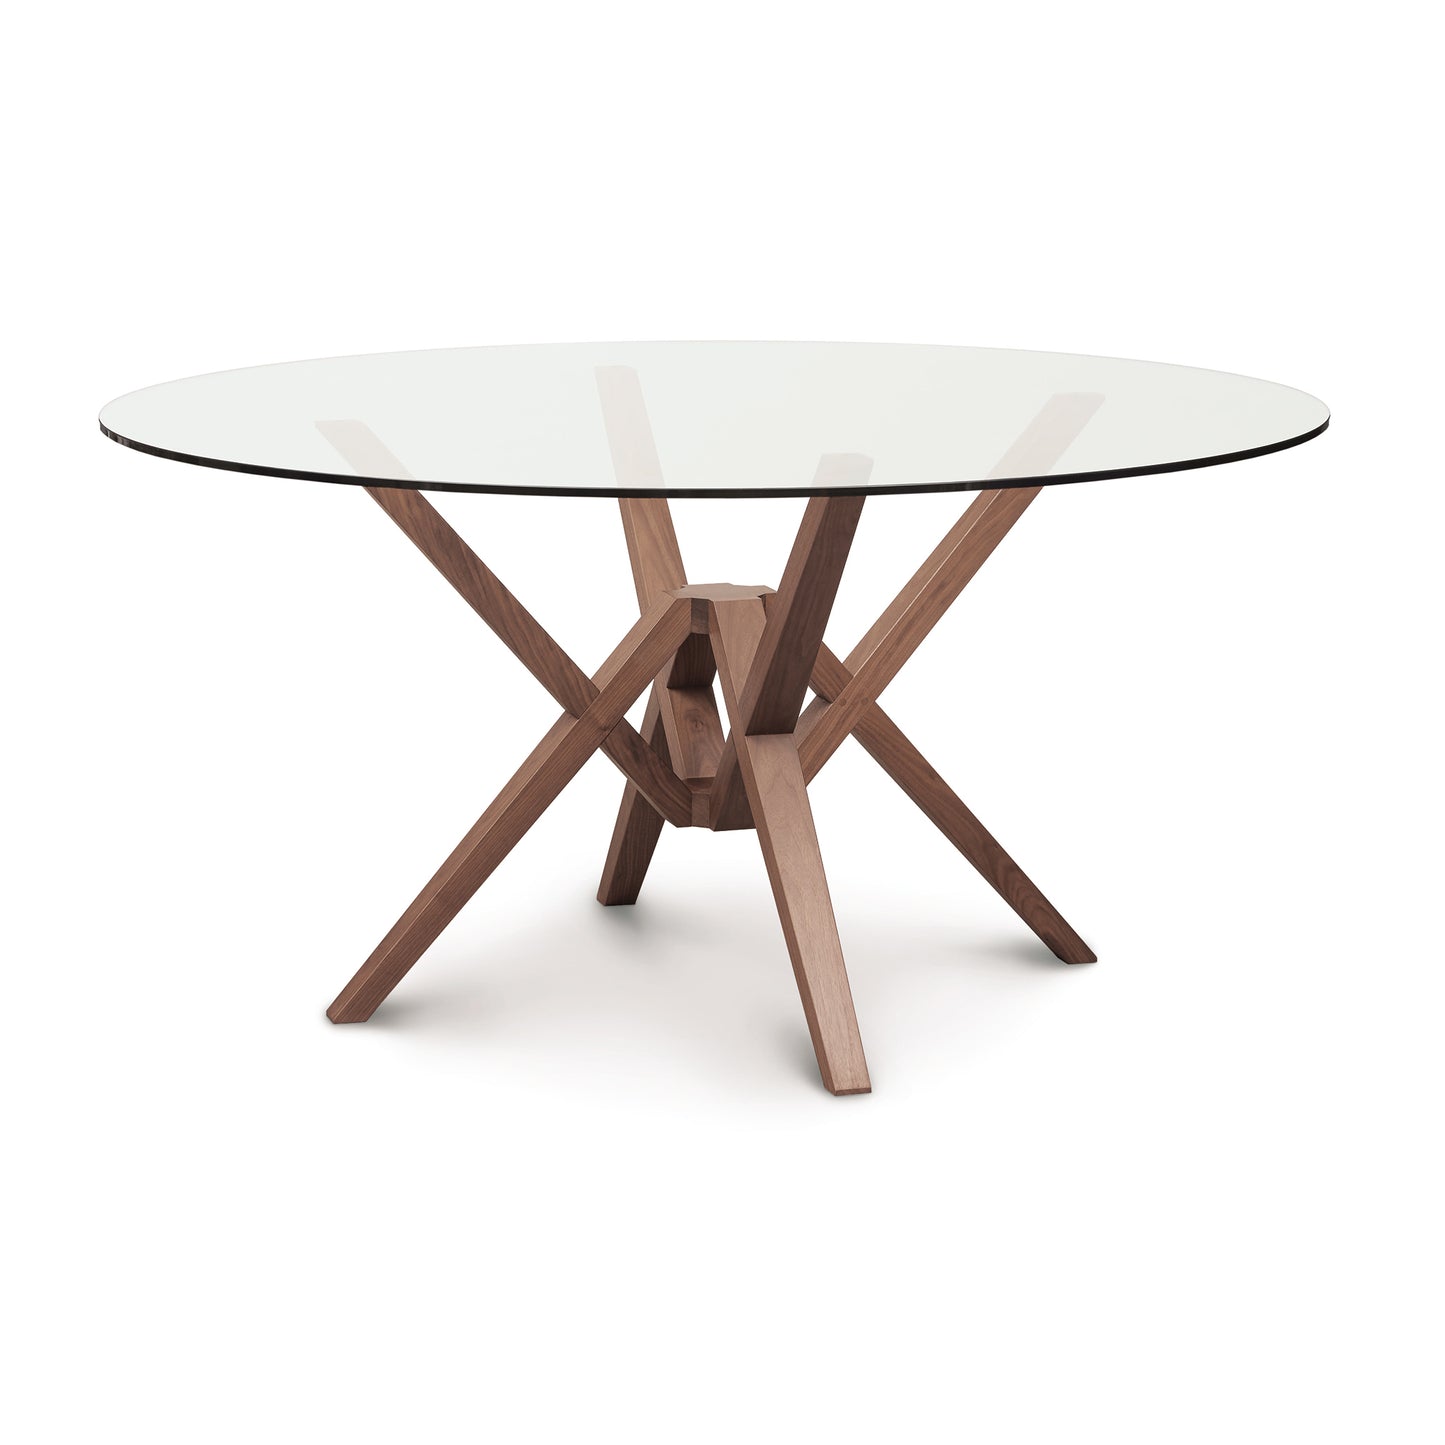 The Copeland Furniture Exeter Round Glass Top Table showcases innovative engineering with its isometric design, featuring a sleek glass top and stylish wooden legs.